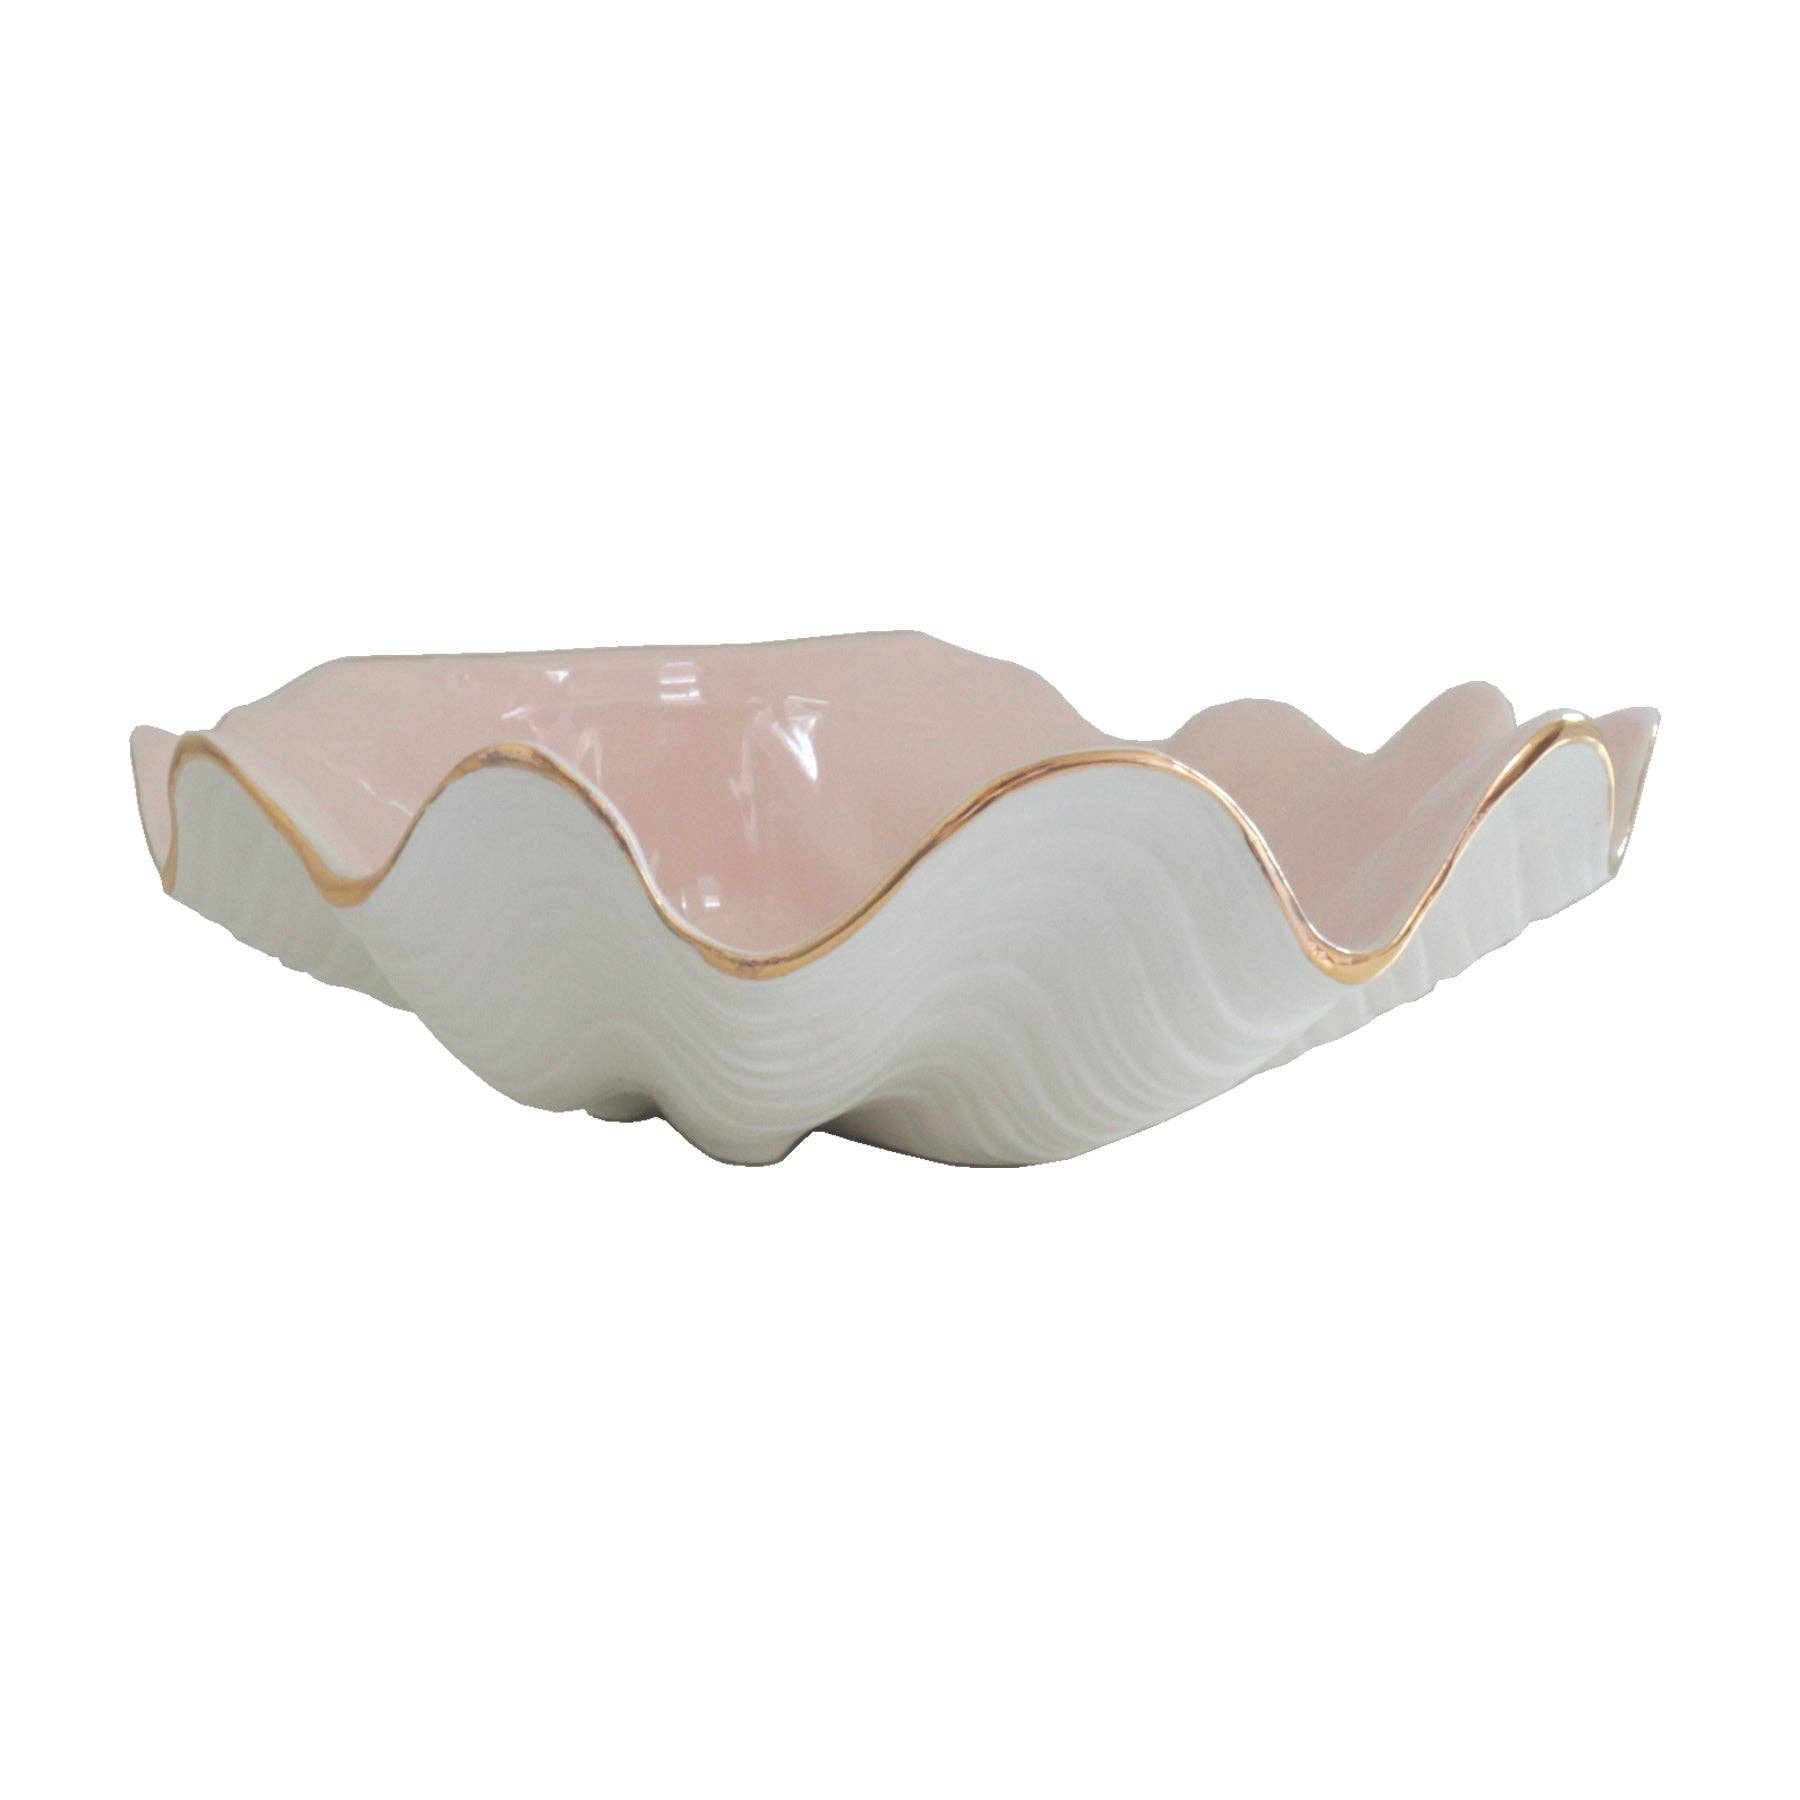 Clam Shell Bowl with 22K Gold Accent: Large / Pink